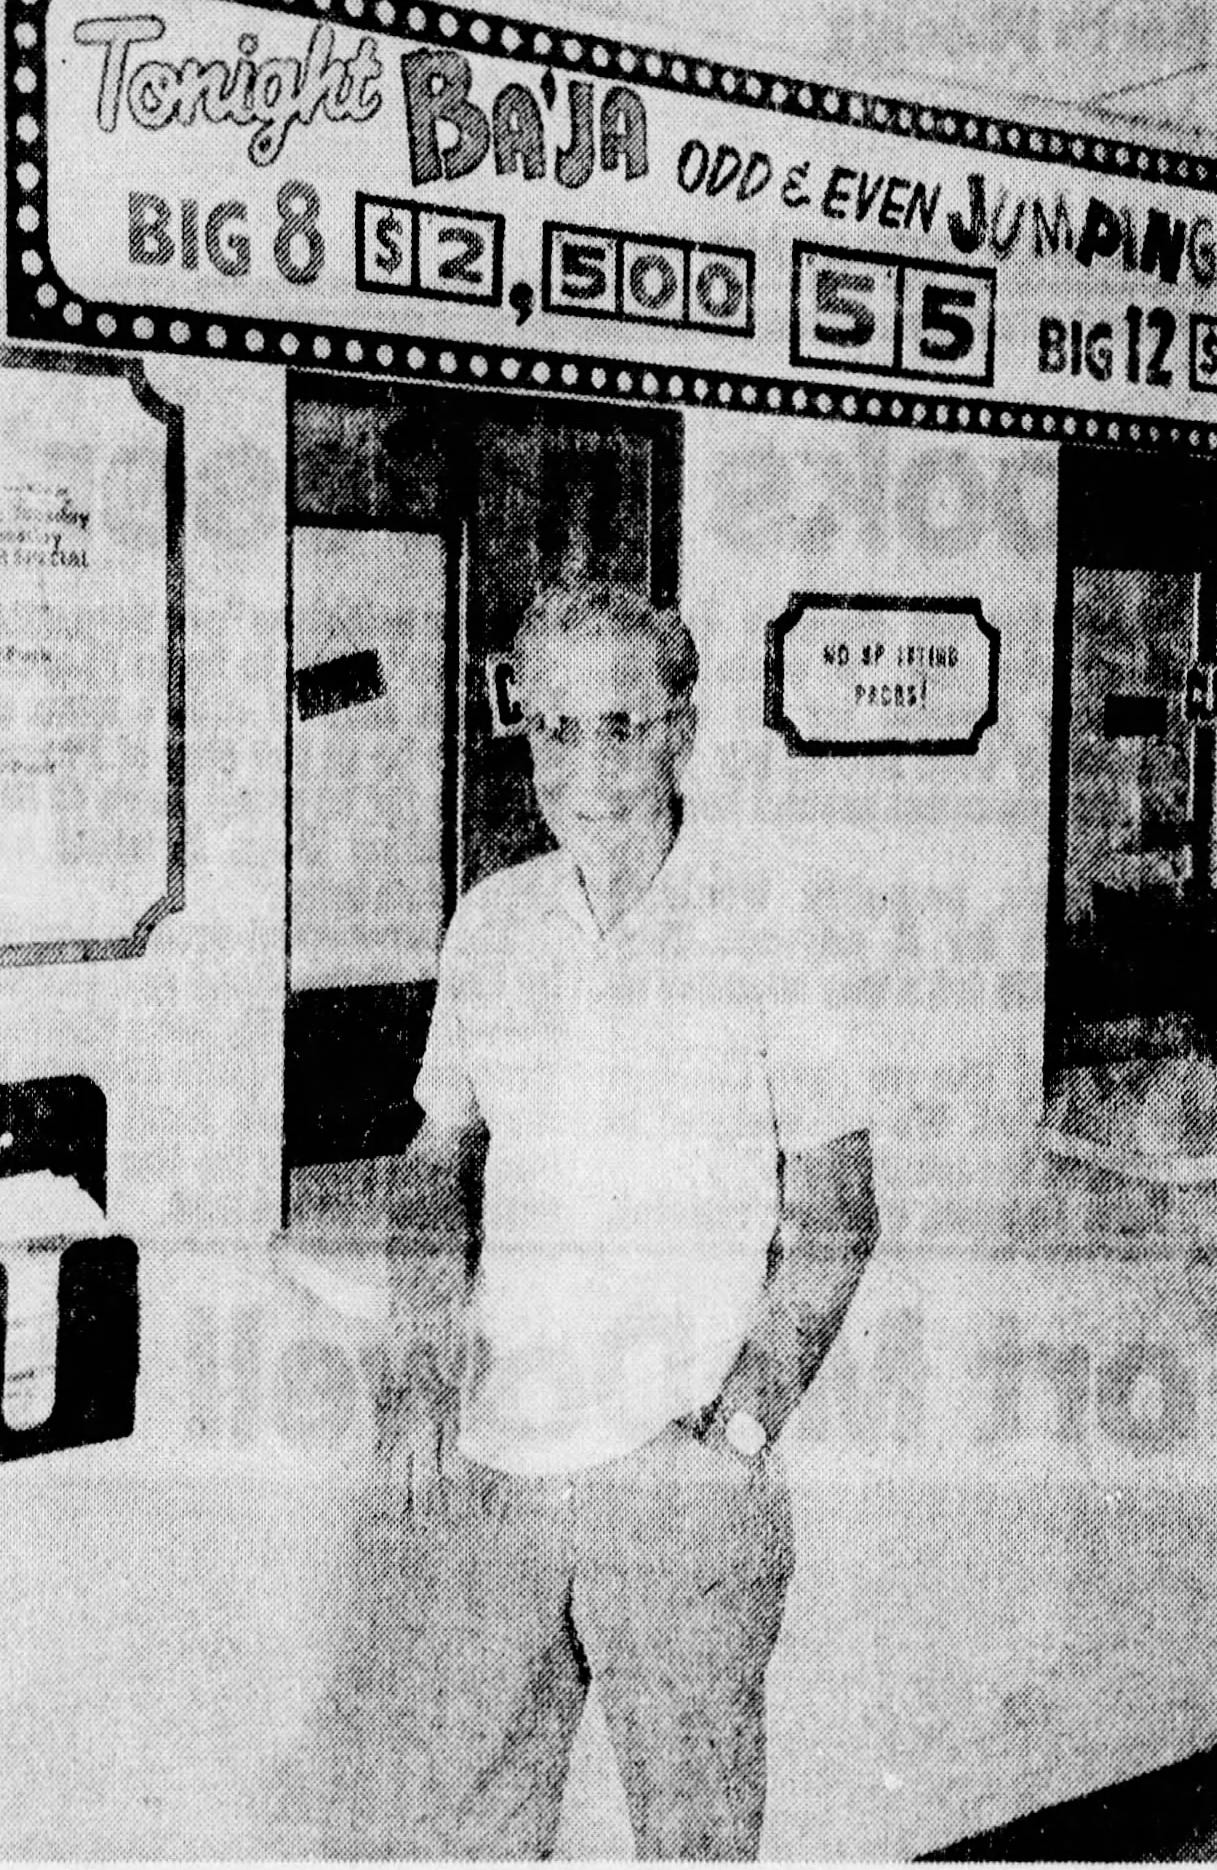 Howard Murray, general manager of the bingo operation, says the top prize he's ever paid is $15,000, but such high payouts are rare. (Published August 11, 1986)